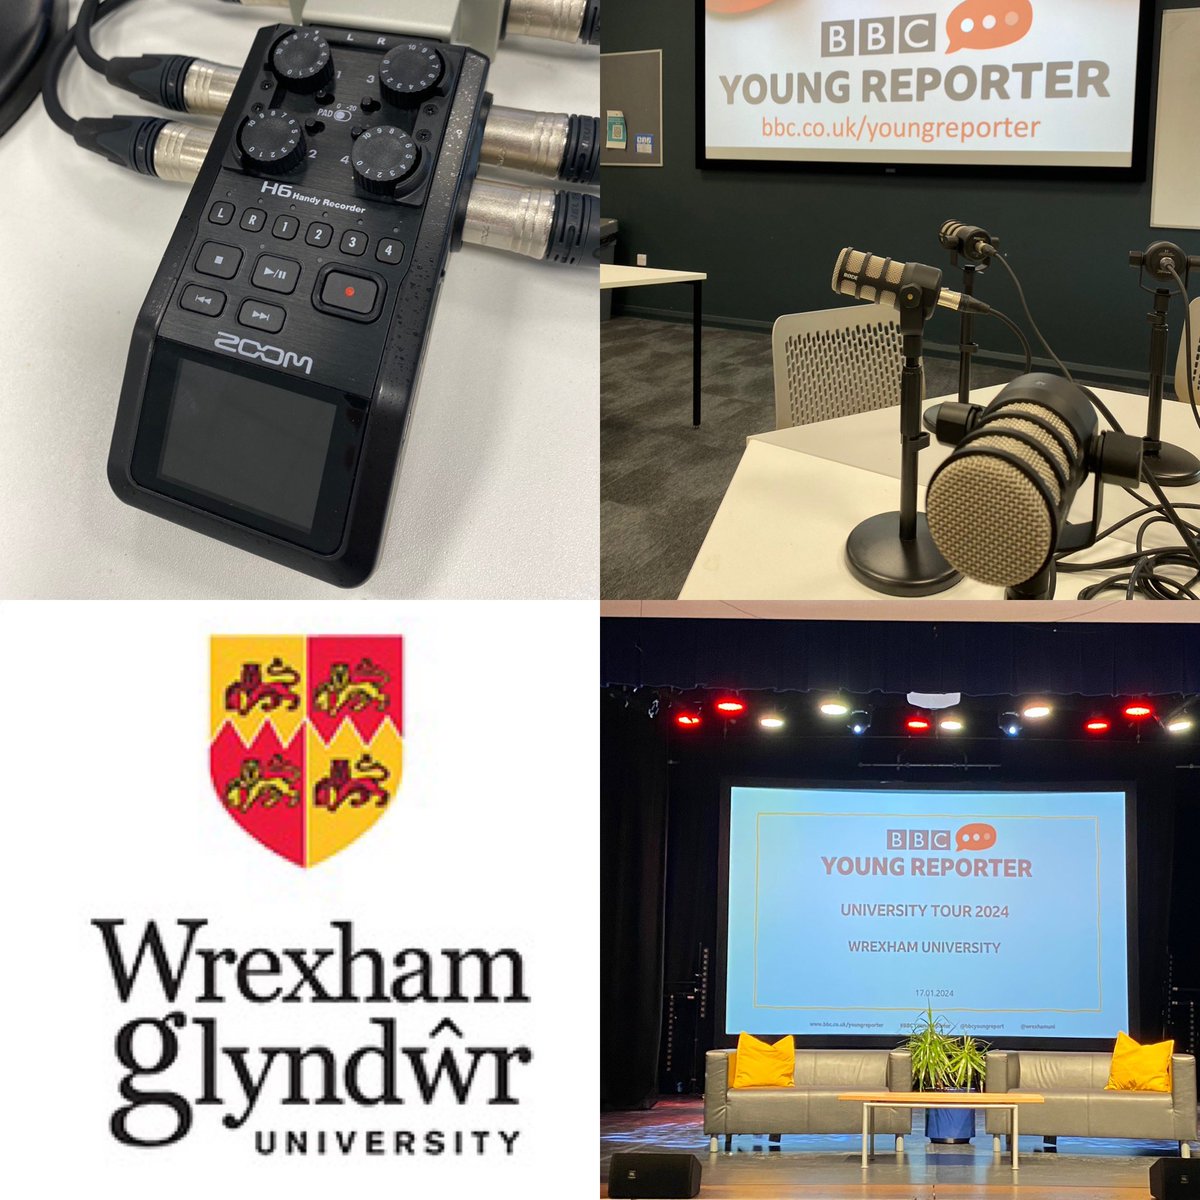 The stage is set for our tour to kick off! #BBCYoungReporter #podcasting #storytelling #creativity 🏴󠁧󠁢󠁷󠁬󠁳󠁿